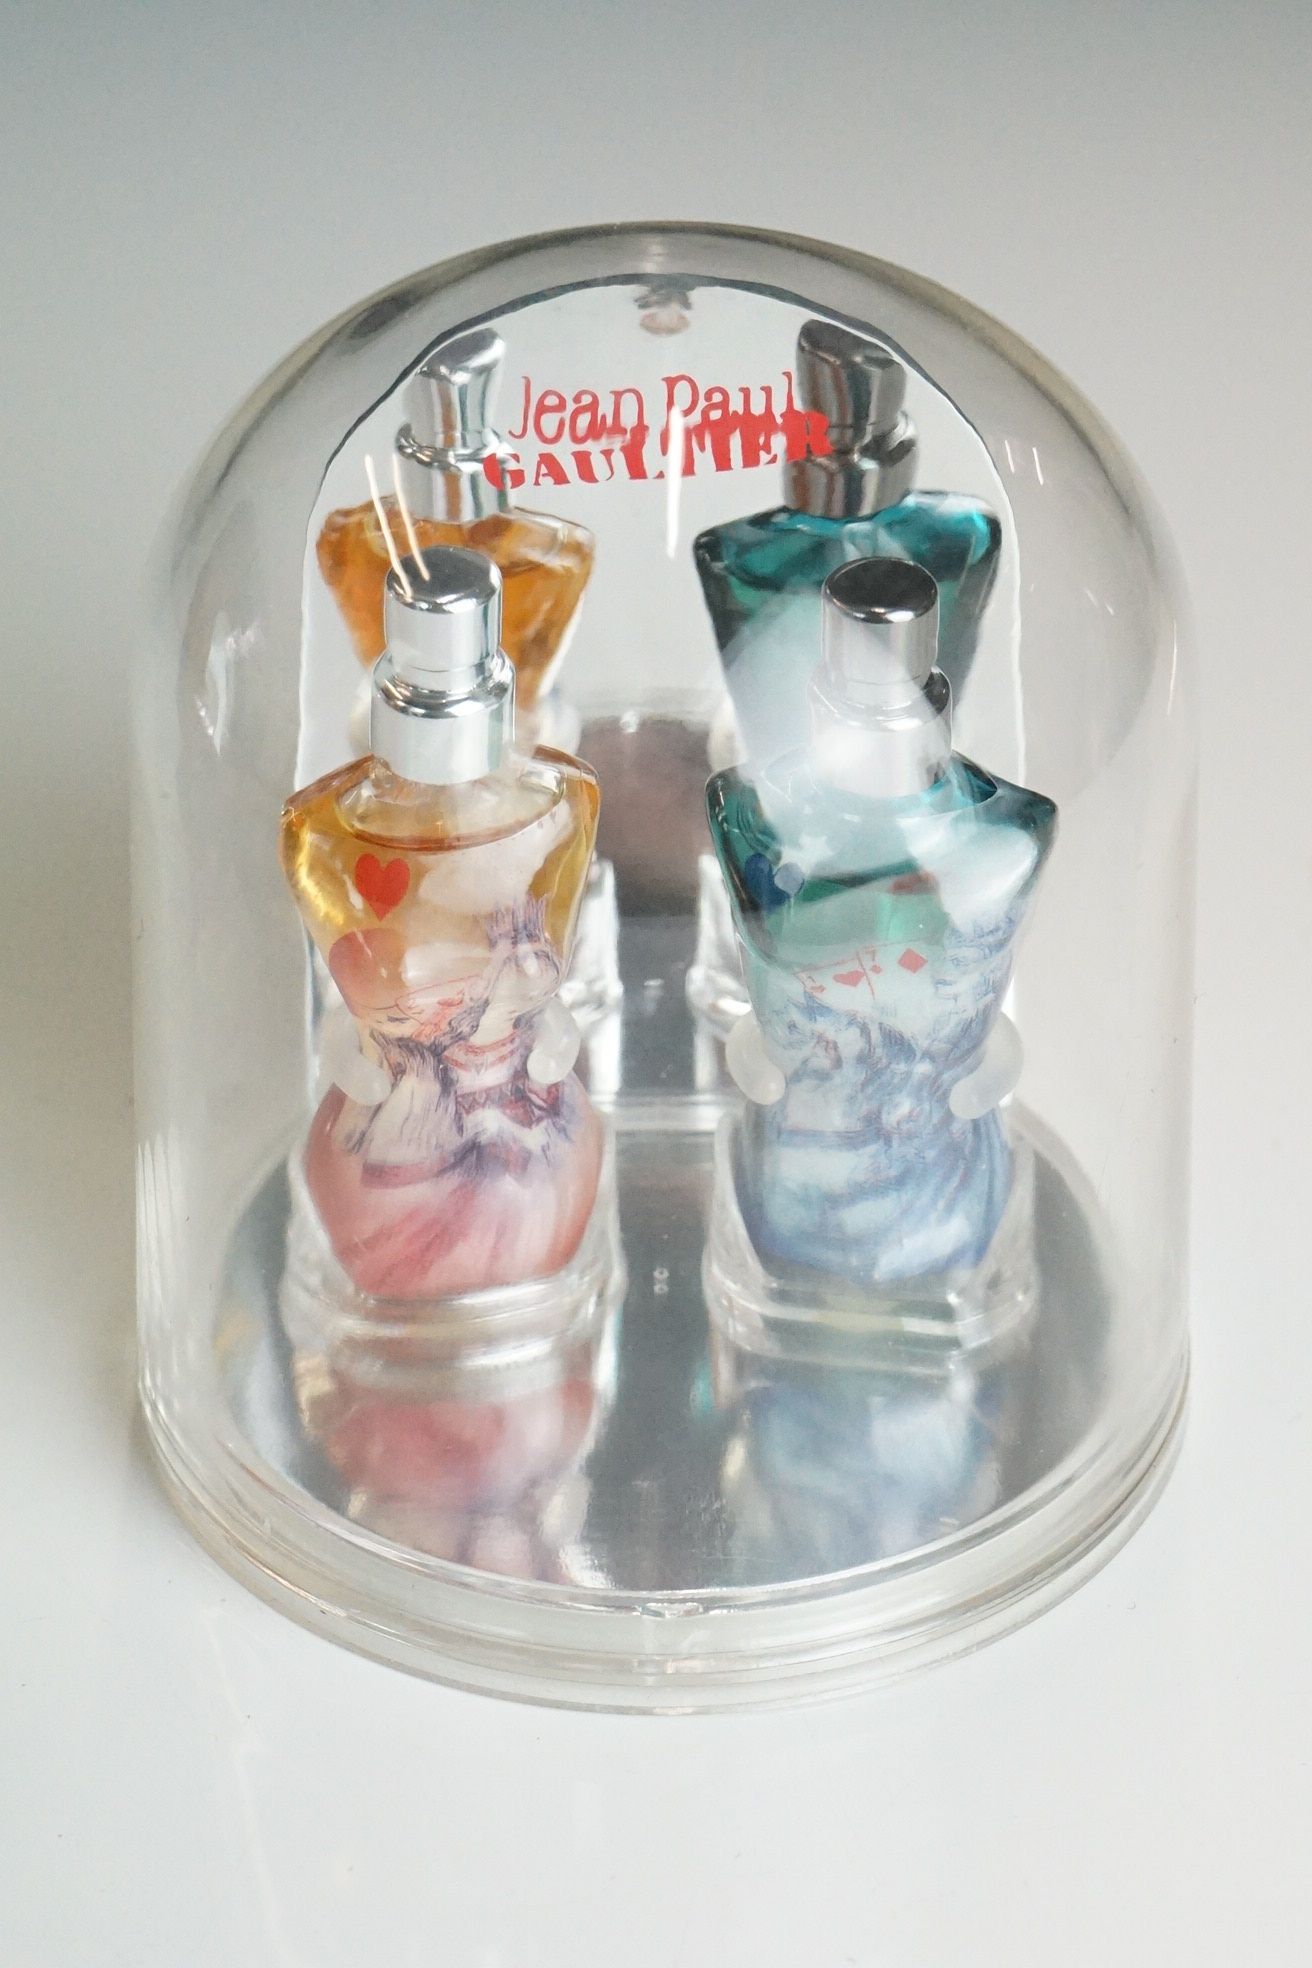 A collection of Jean Paul Gaultier from the Classique range to include various sizes and editions of - Image 8 of 10